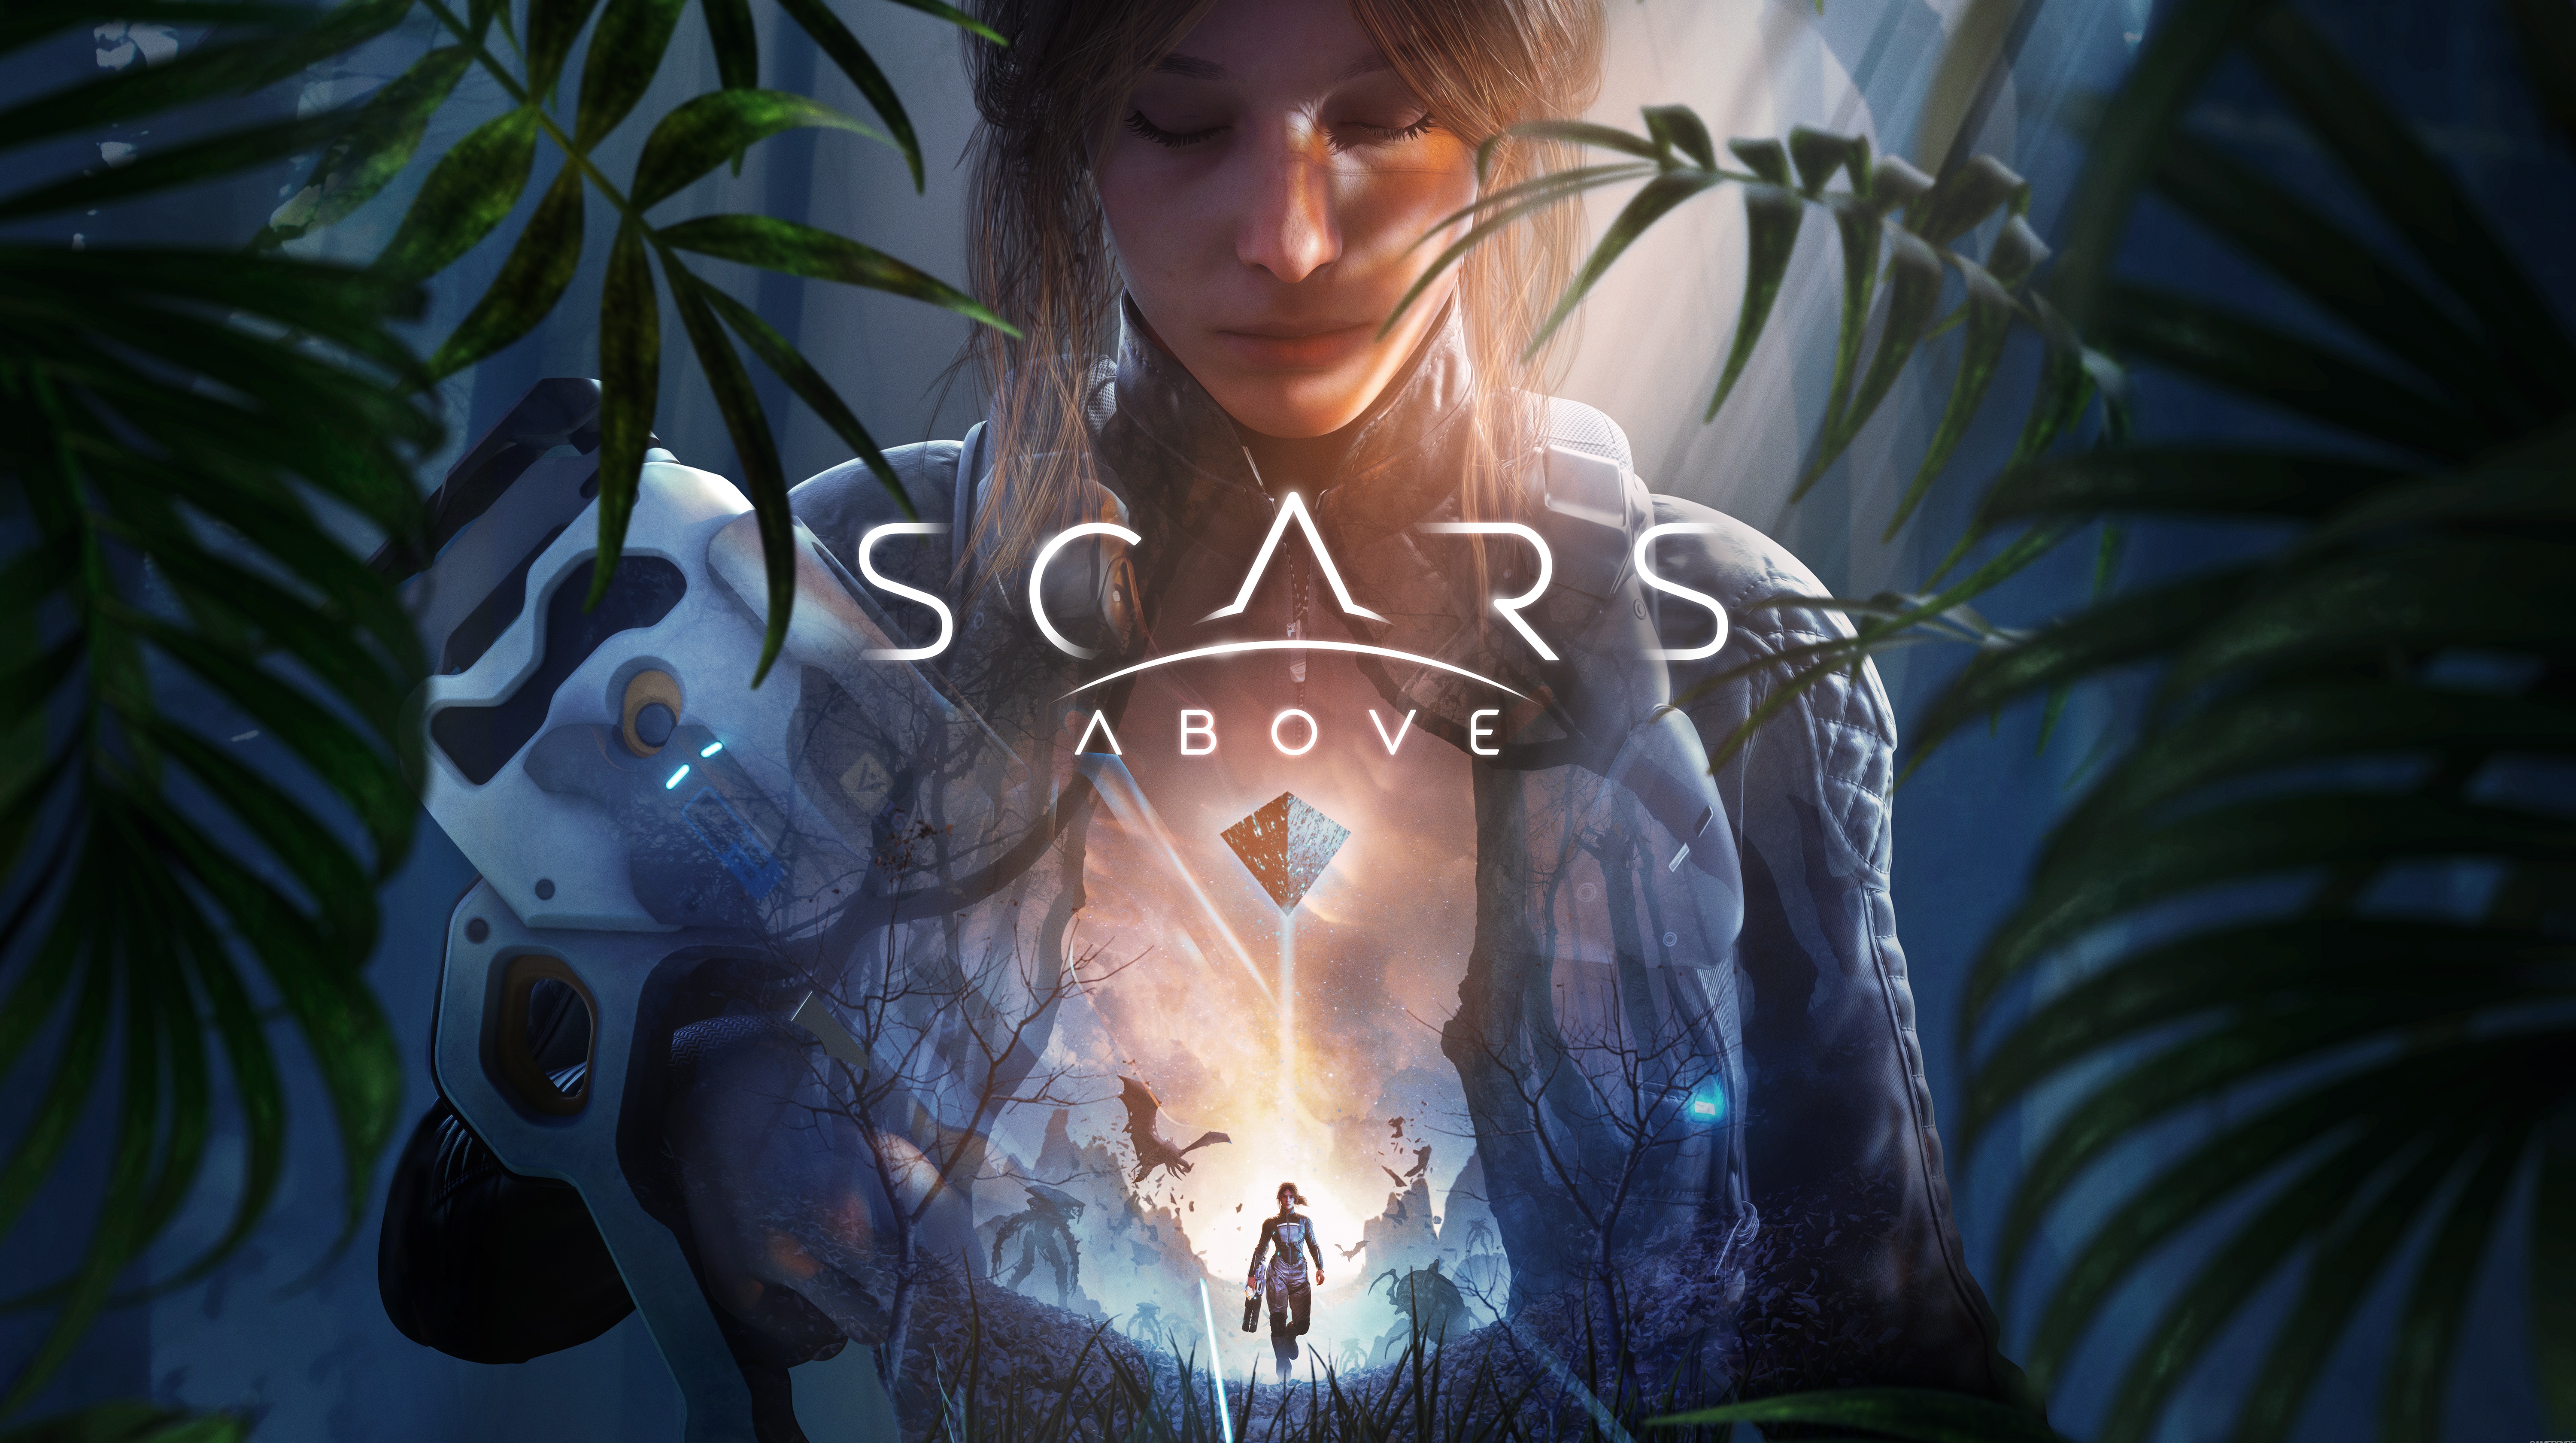 Above games. Scars above game. Обои игры.